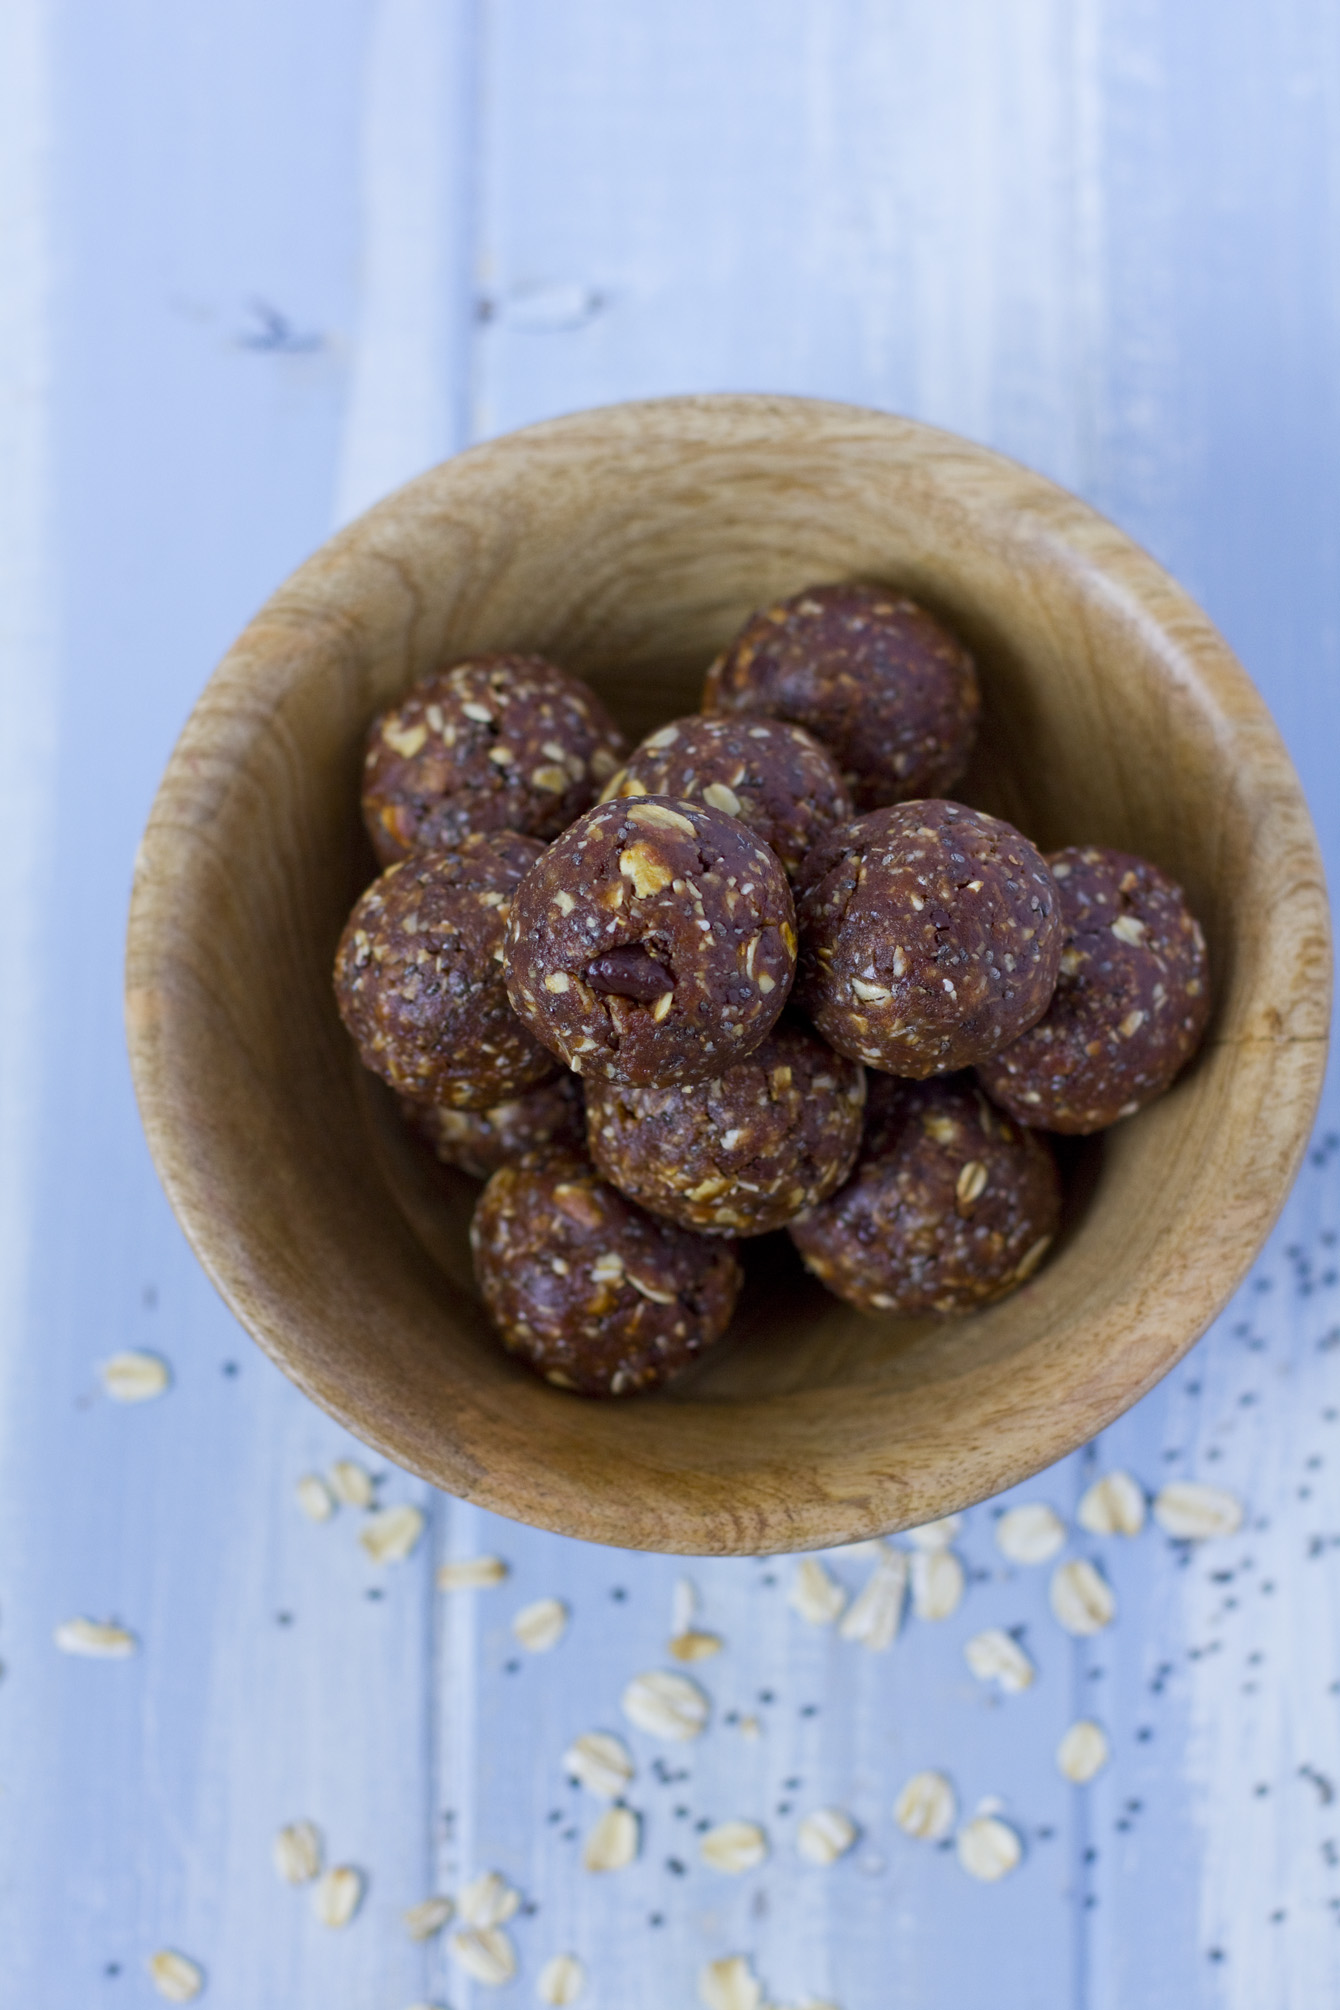 protein-packed, power balls, oats, dates, chia seeds, peanut butter, dark chocolate, energy balls, naturally sweetened, sugar-free, dairy-free, wholesome